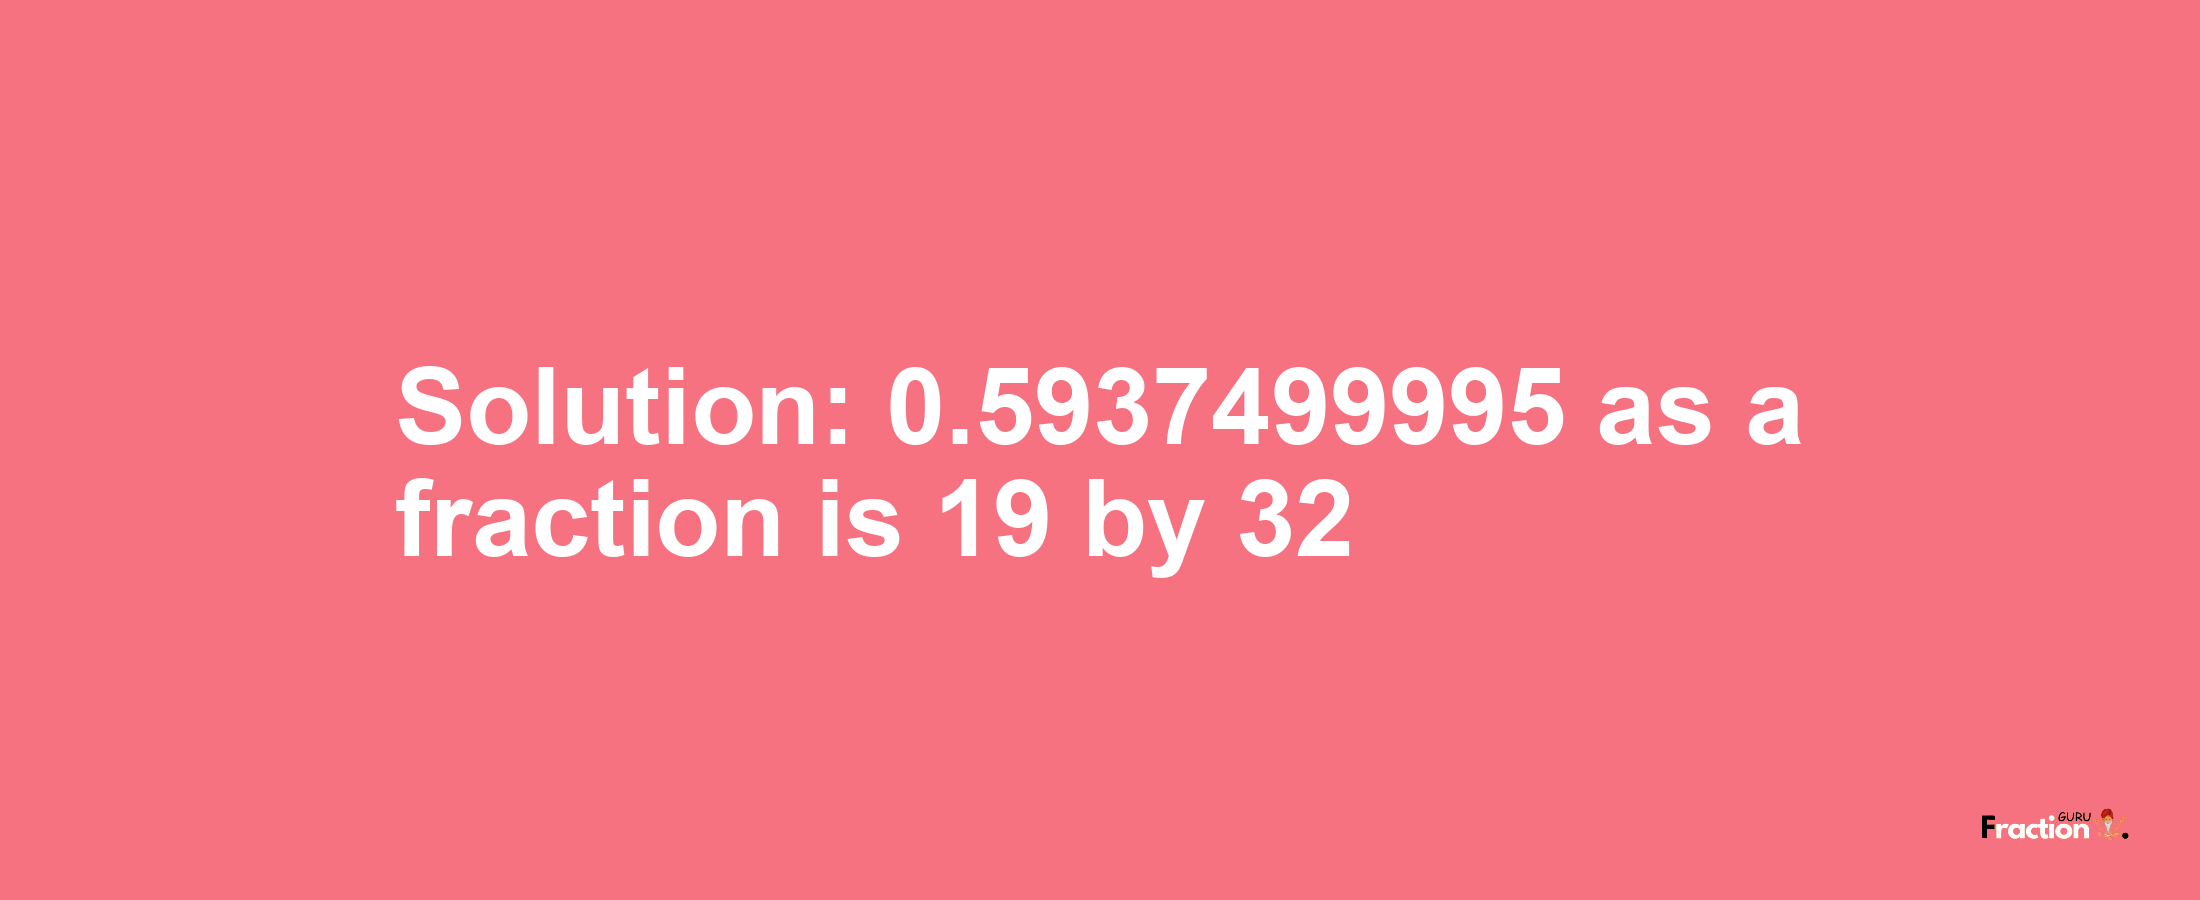 Solution:0.5937499995 as a fraction is 19/32